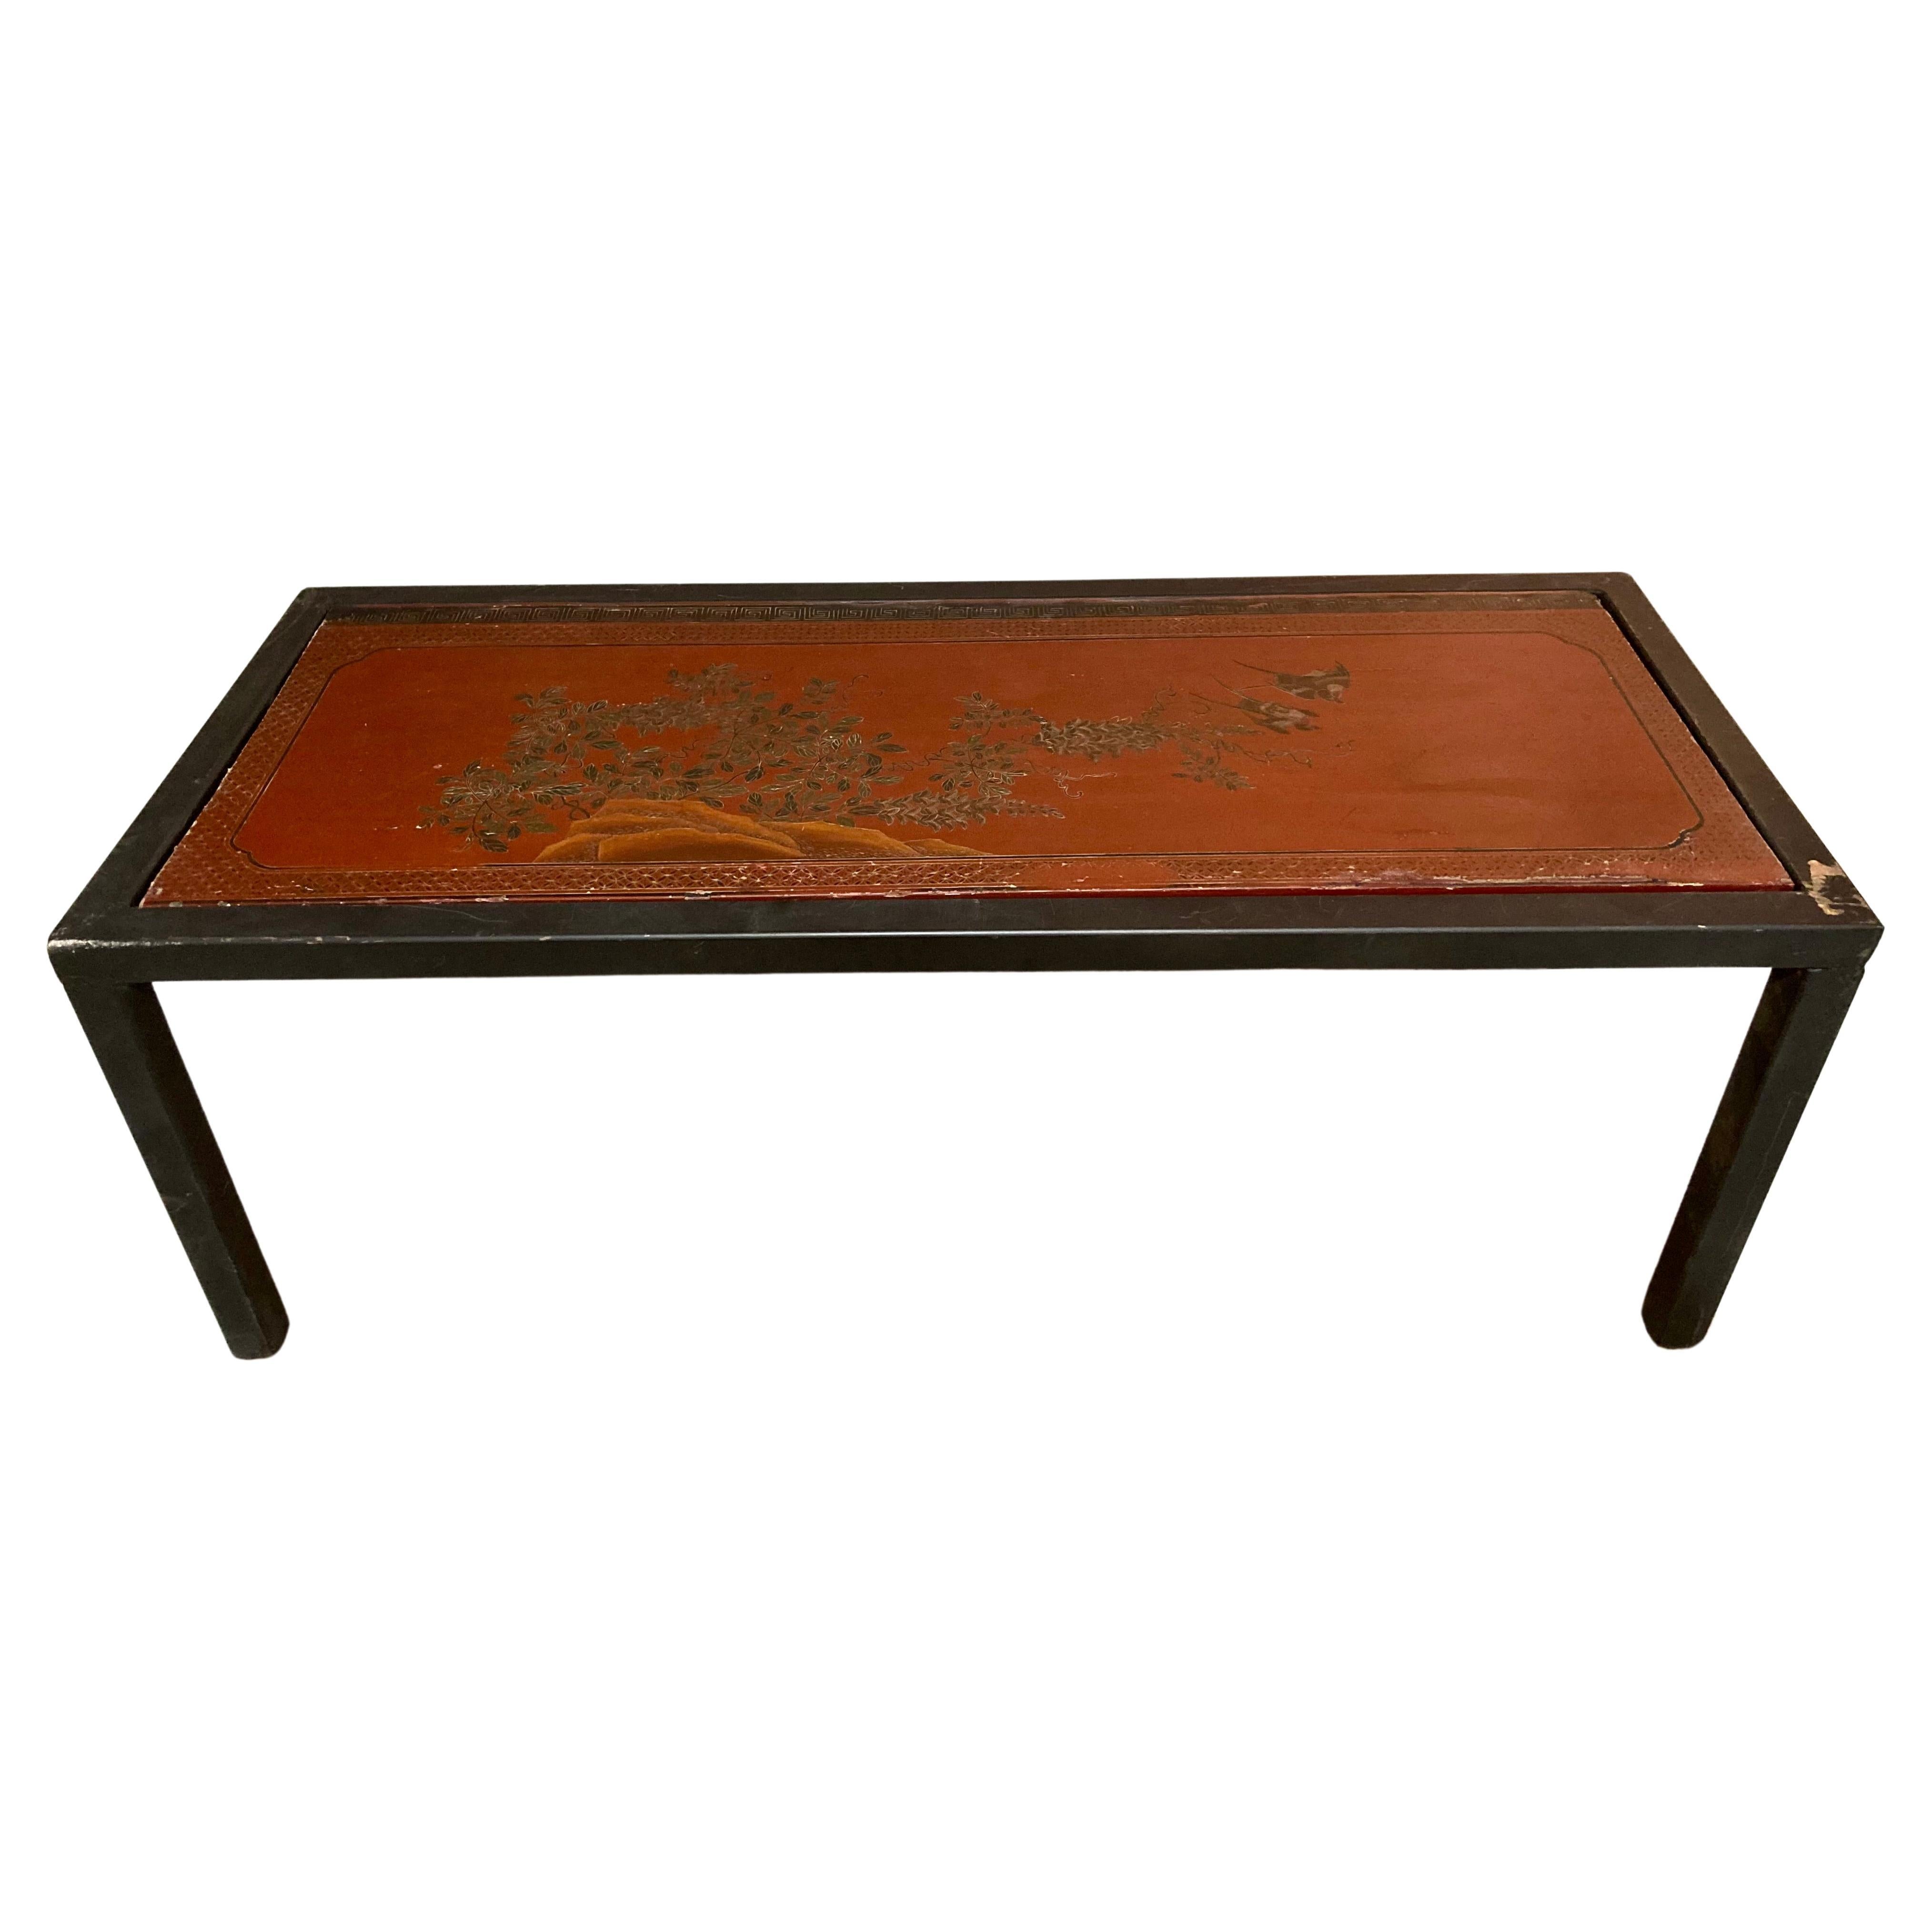 Tony Duquette Custom Coffee Table With Inset Chinese Panel For Sale